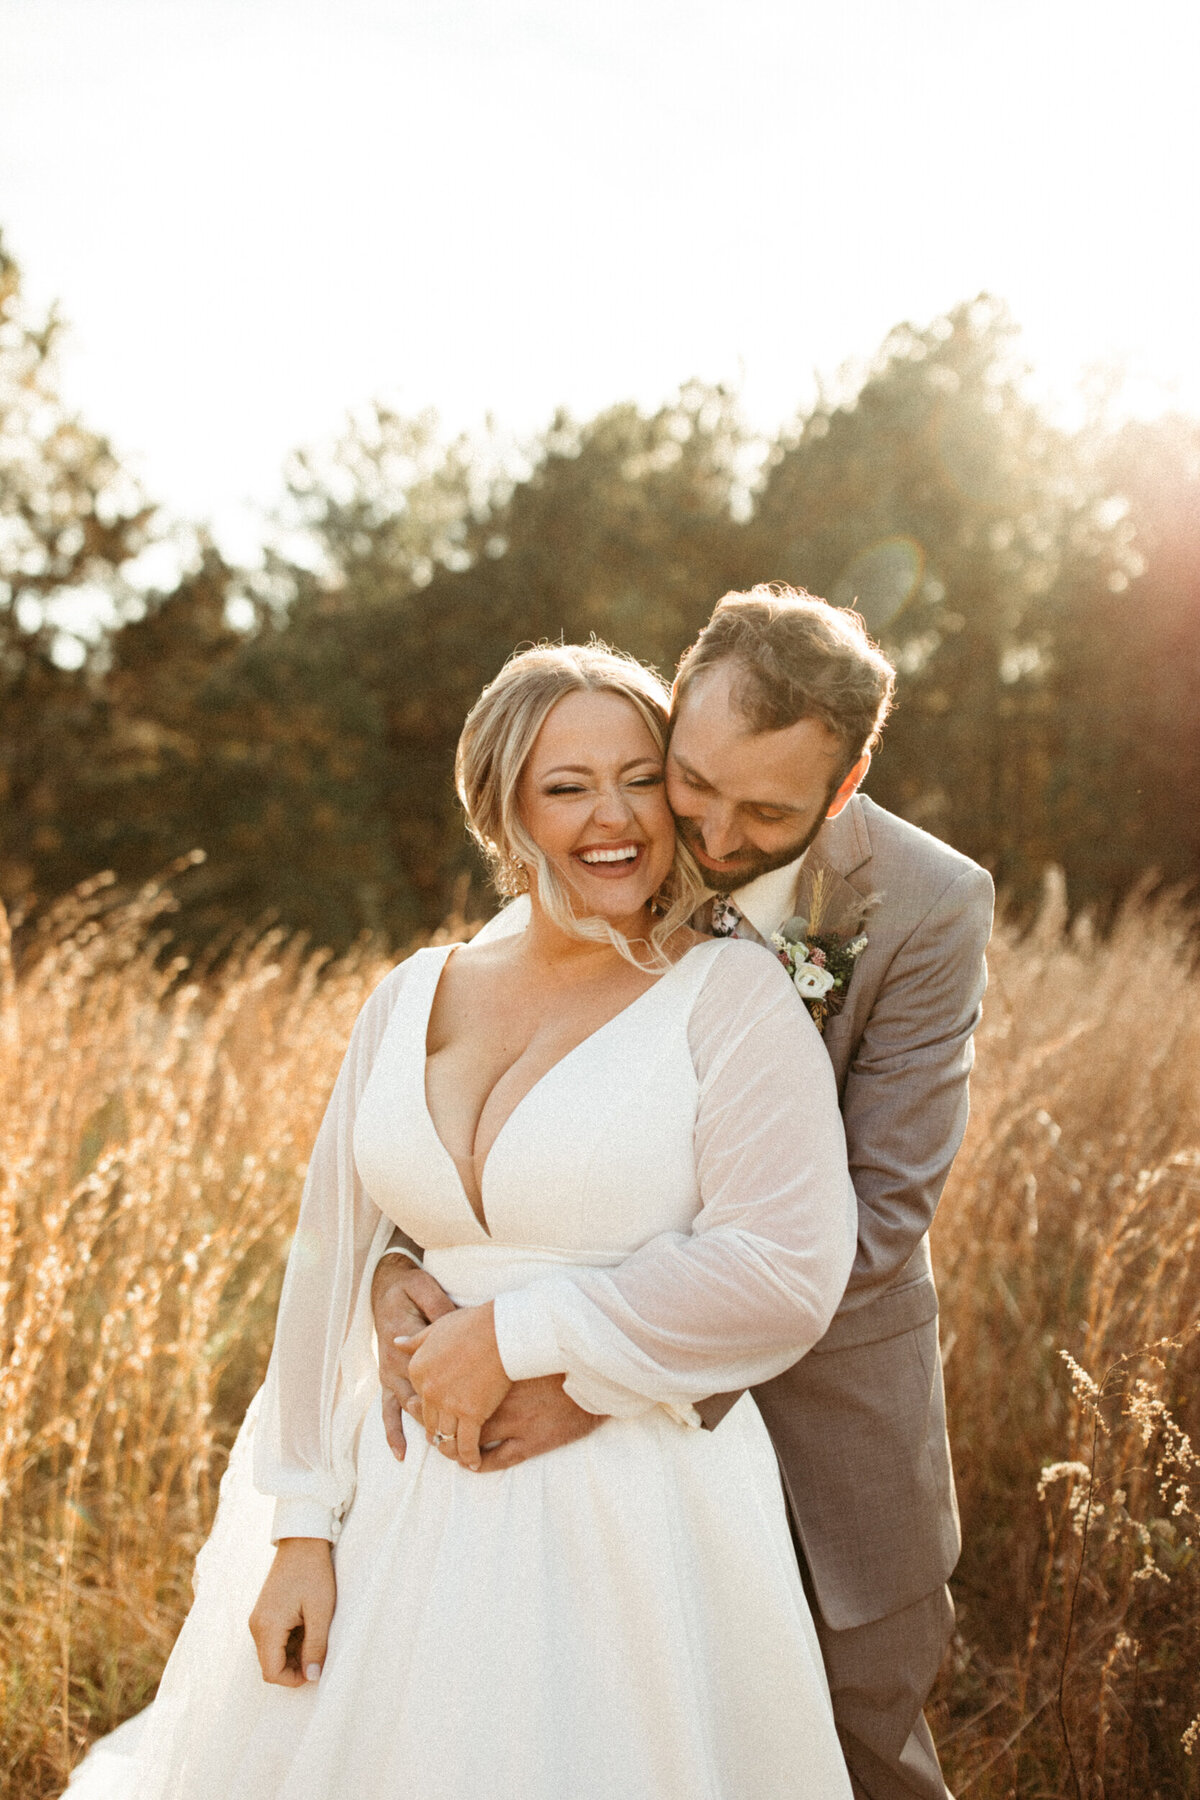 Groom squeezing bride from behind and making her laugh in a field with tall grass